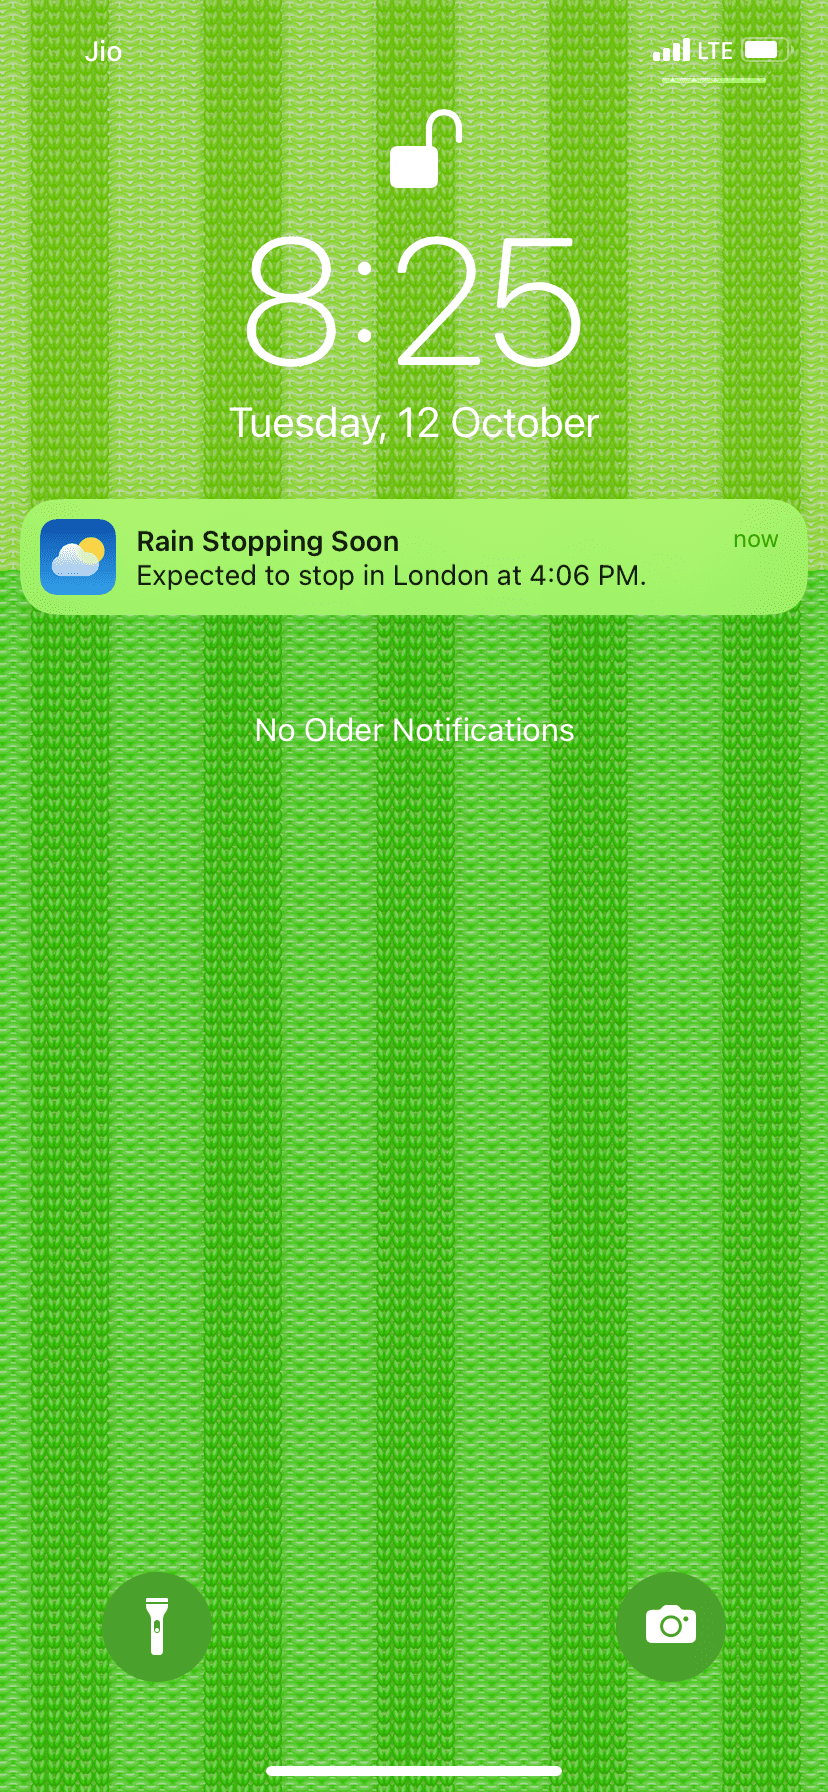 Weather app in iOS 15 showing notification for rain stopping soon